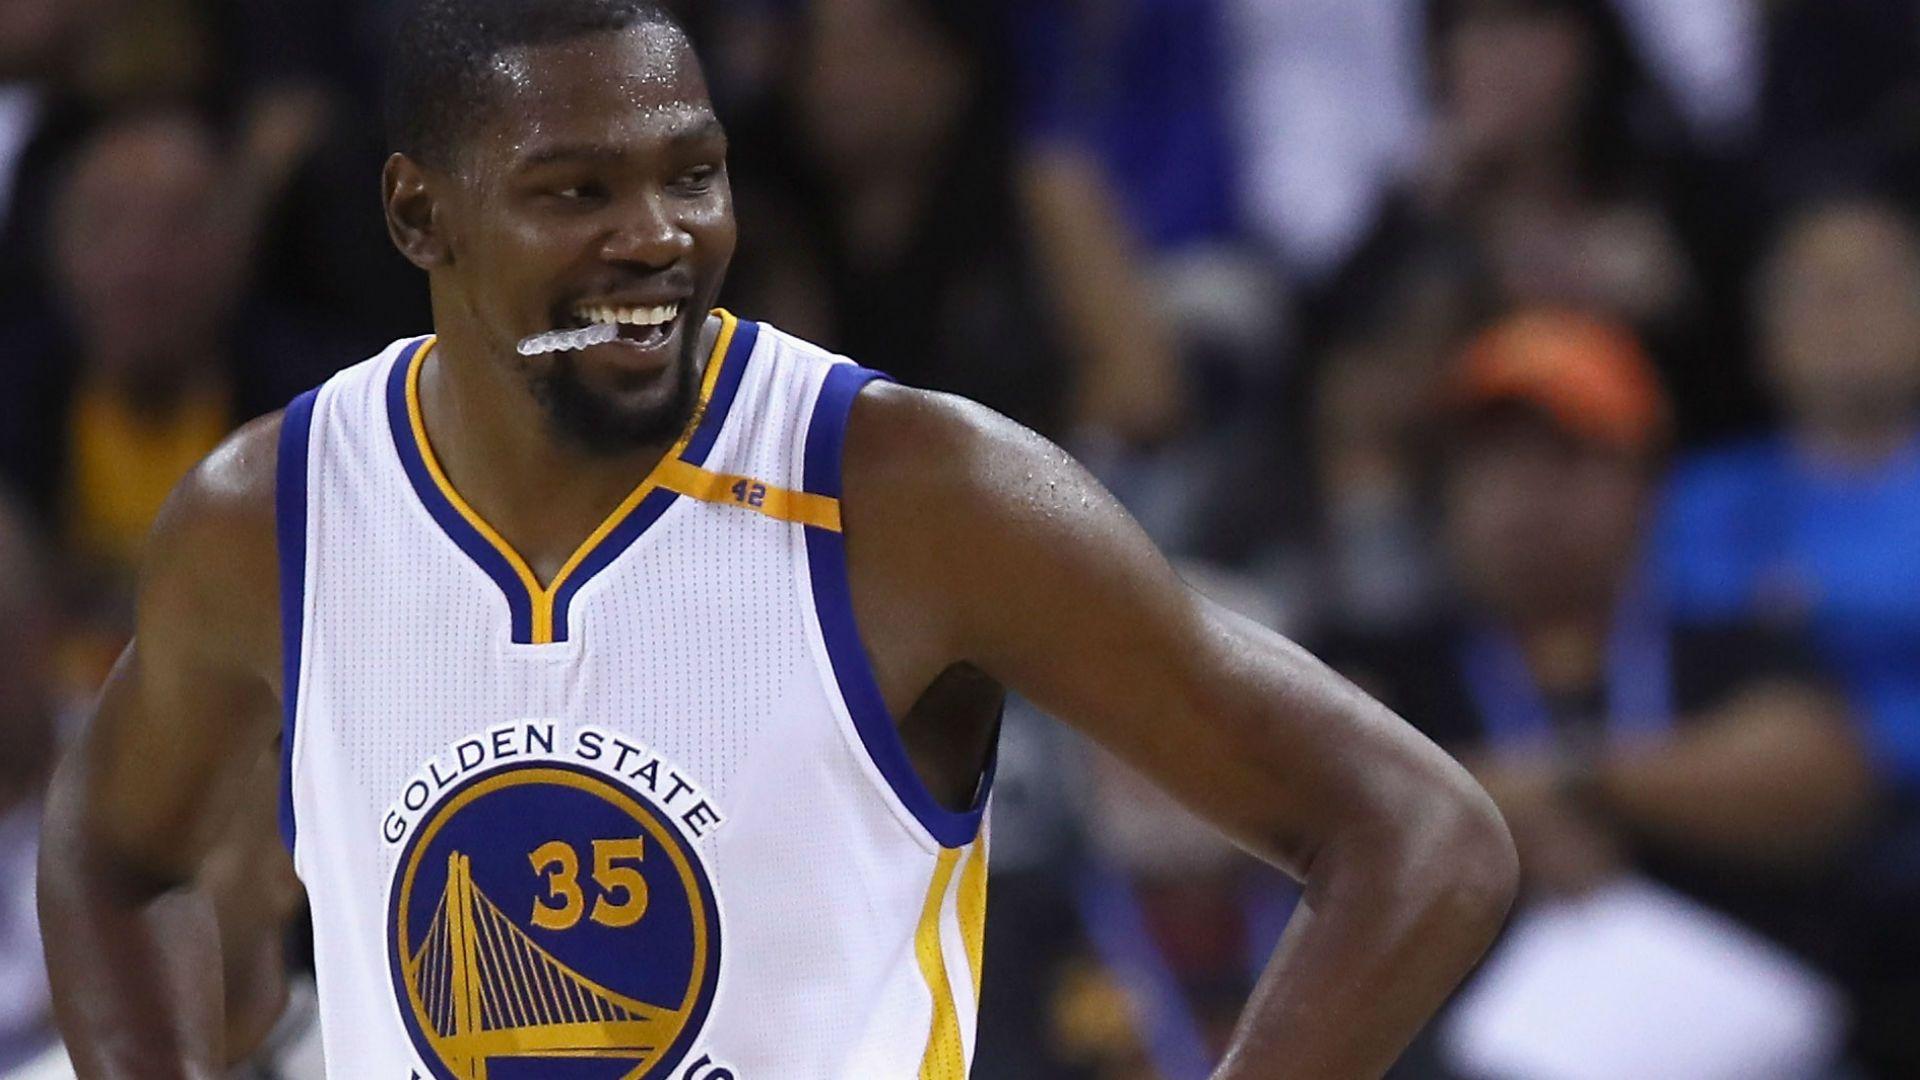 REVEALED: The moment Kevin Durant knew he would join the Warriors